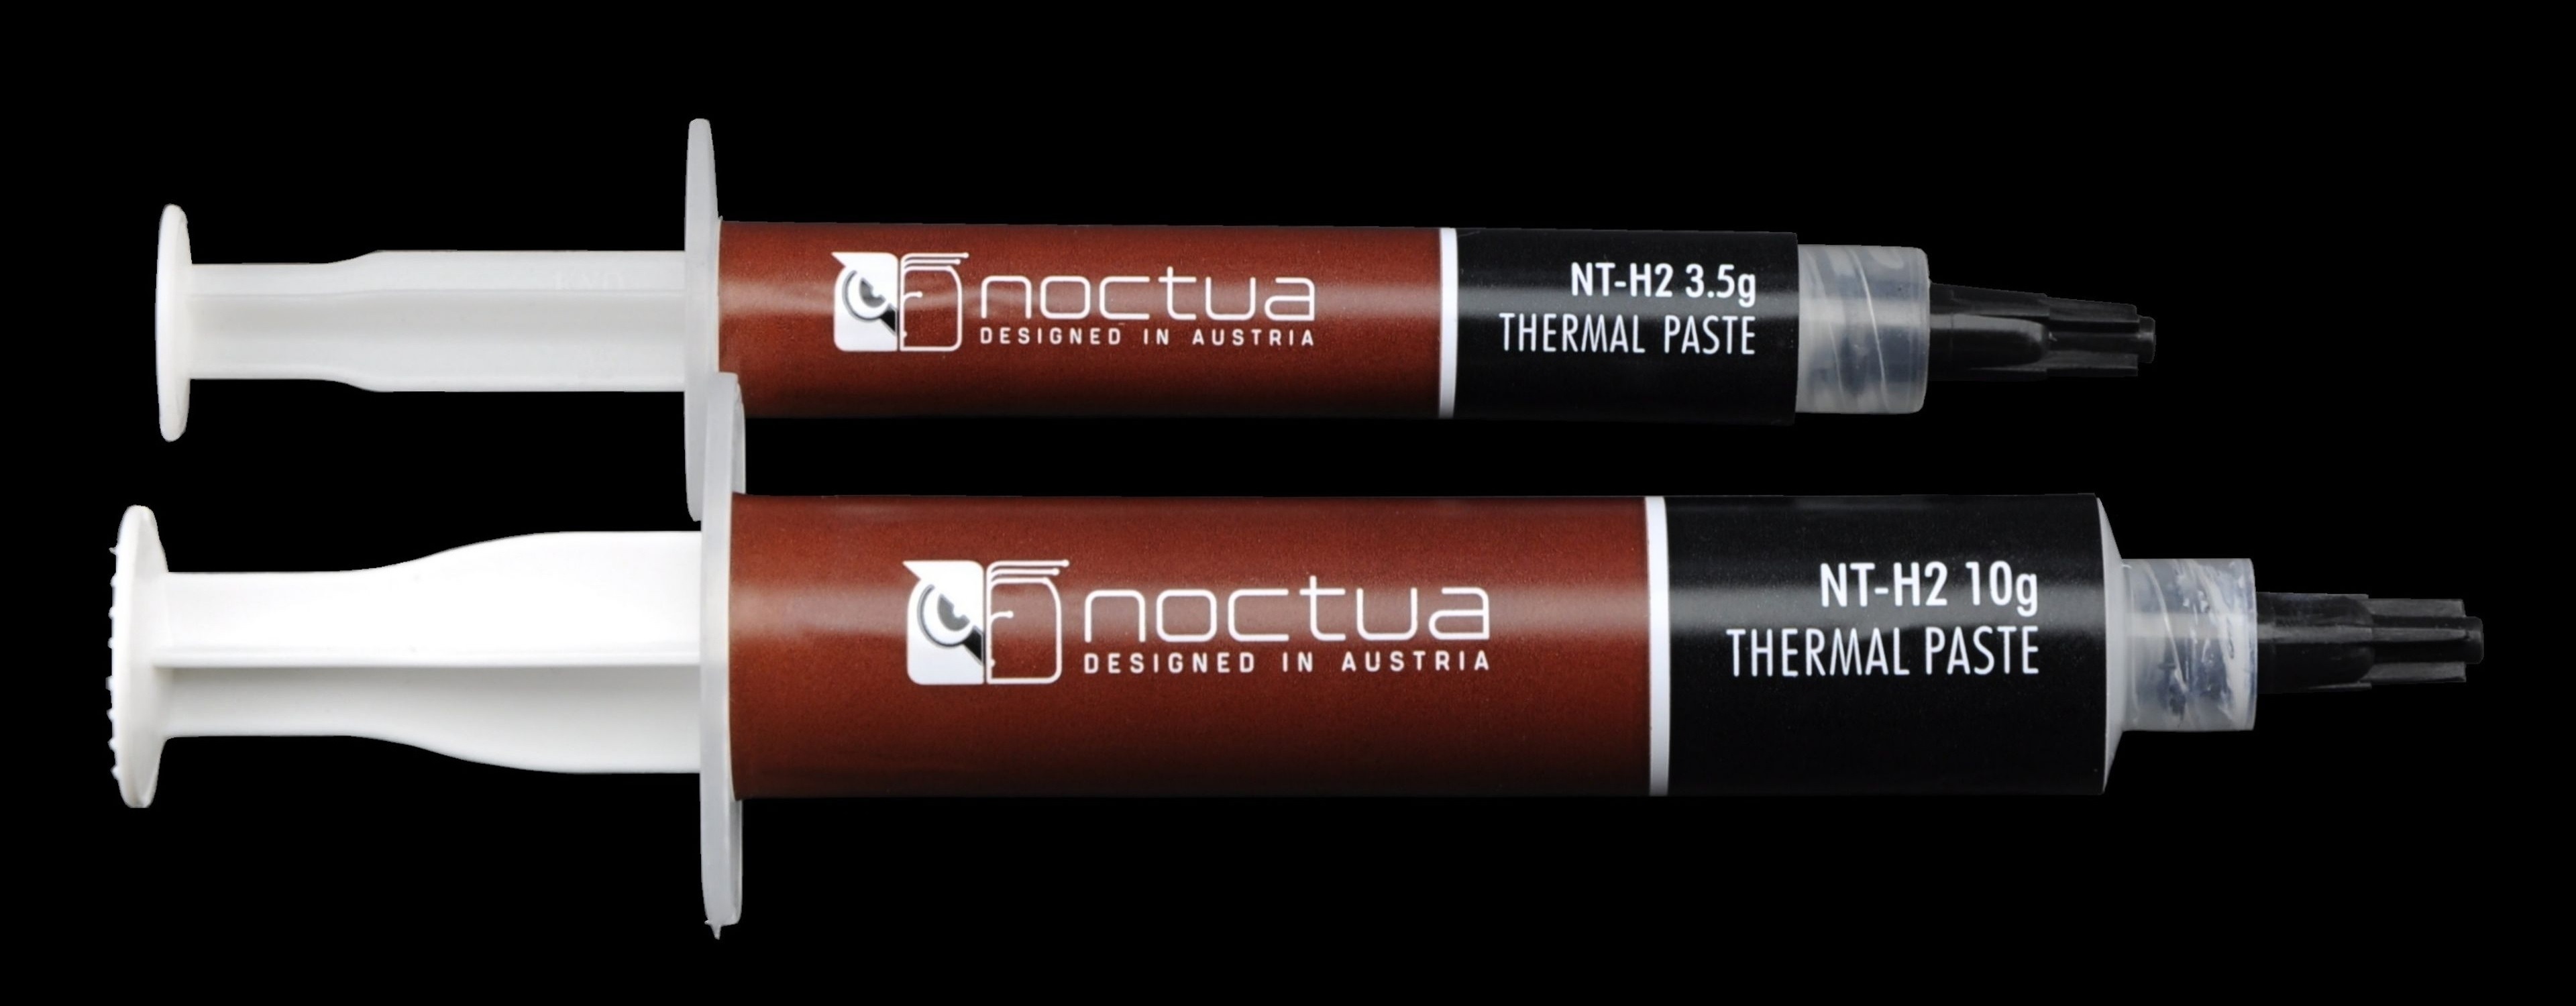 The goddess of thermal pastes has a name: Noctua NT-H2 